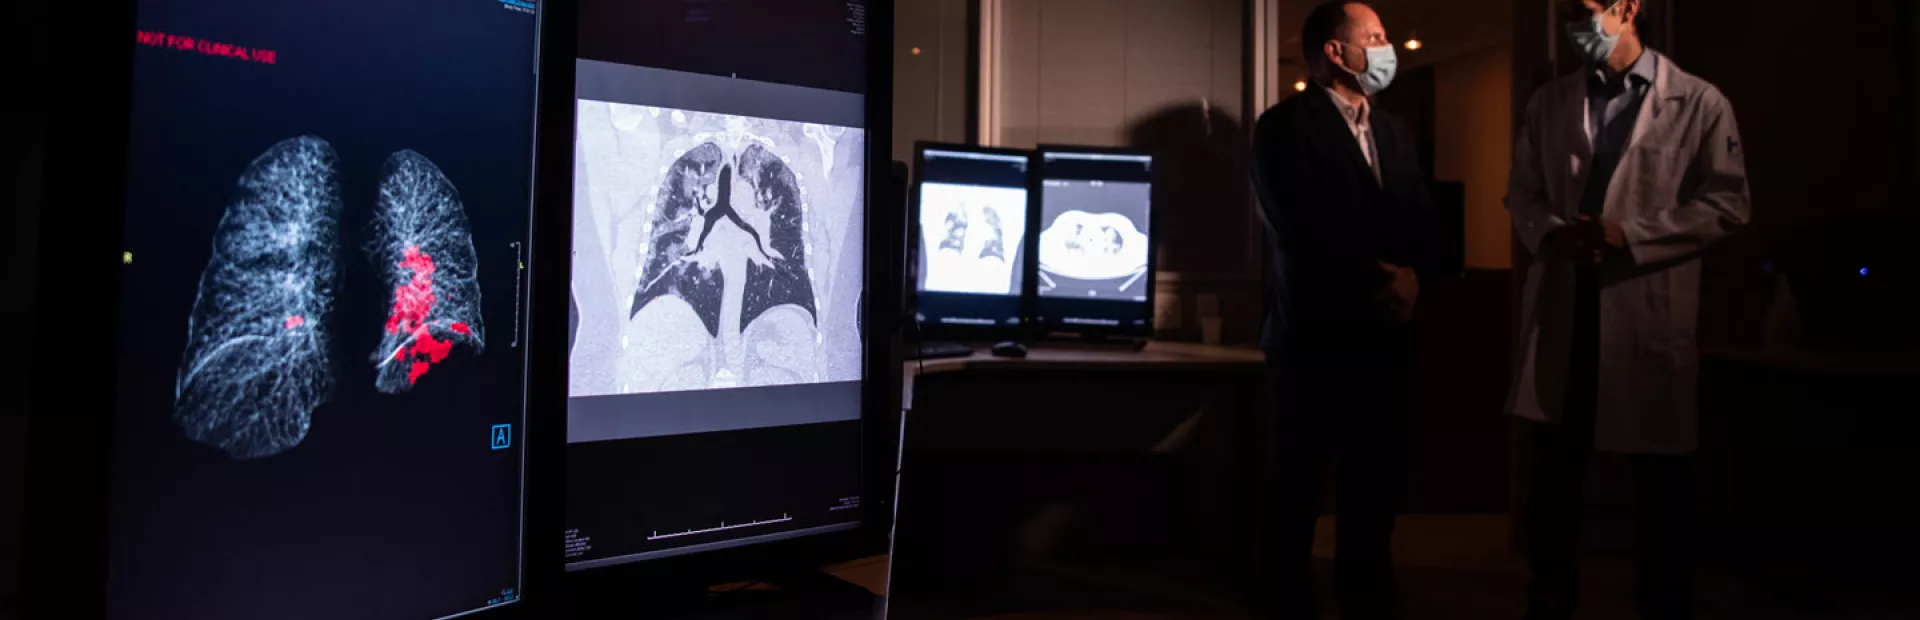 Image of patient’s lungs being analyzed